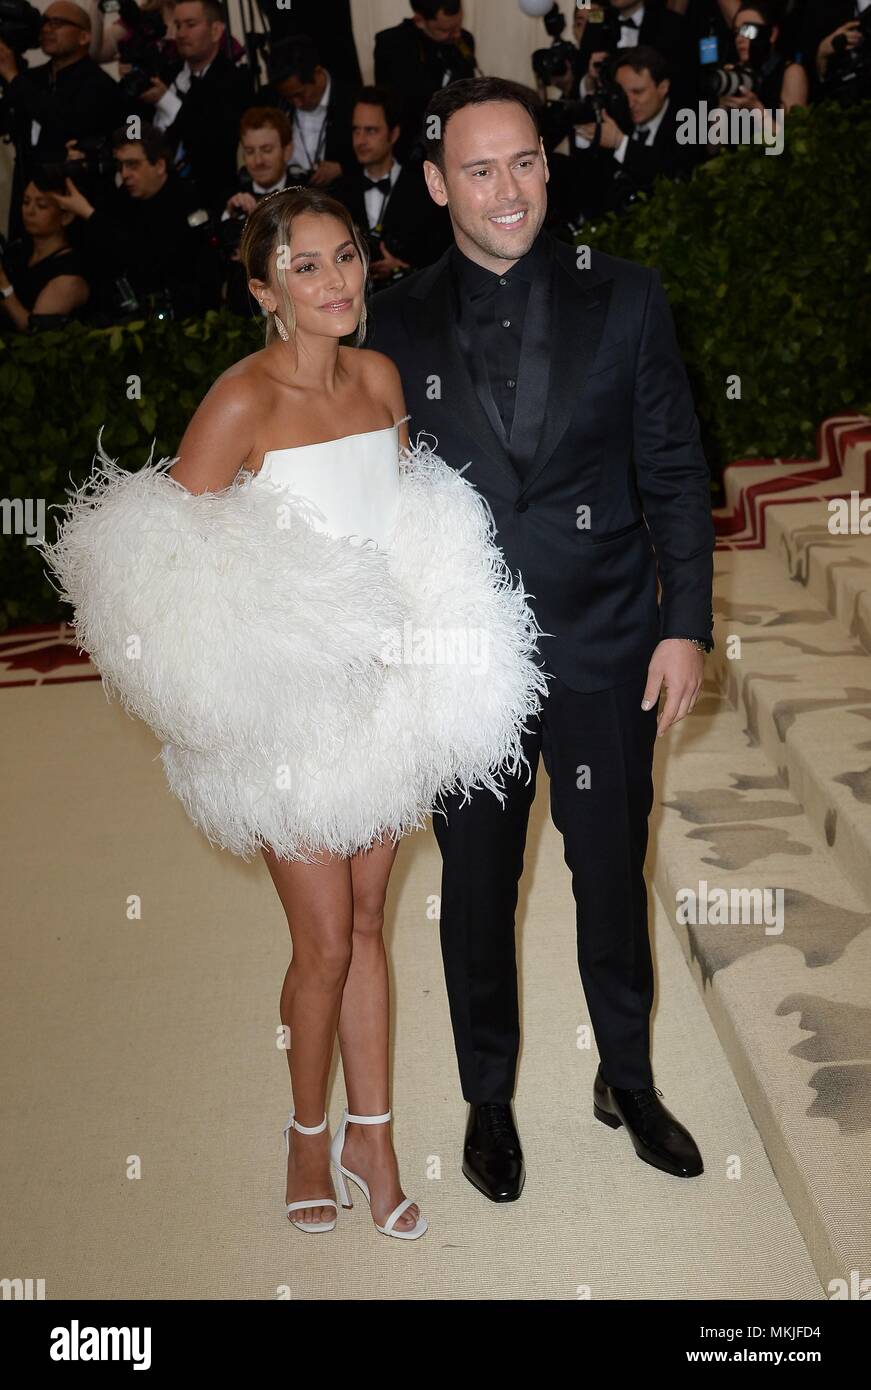 Scooter Braun at arrivals for Heavenly Bodies: Fashion and the Catholic Imagination Met Gala Costume Institute Annual Benefit - Part 5, Metropolitan Museum of Art, New York, NY May 7, 2018. Photo By: Kristin Callahan/Everett Collection Stock Photo